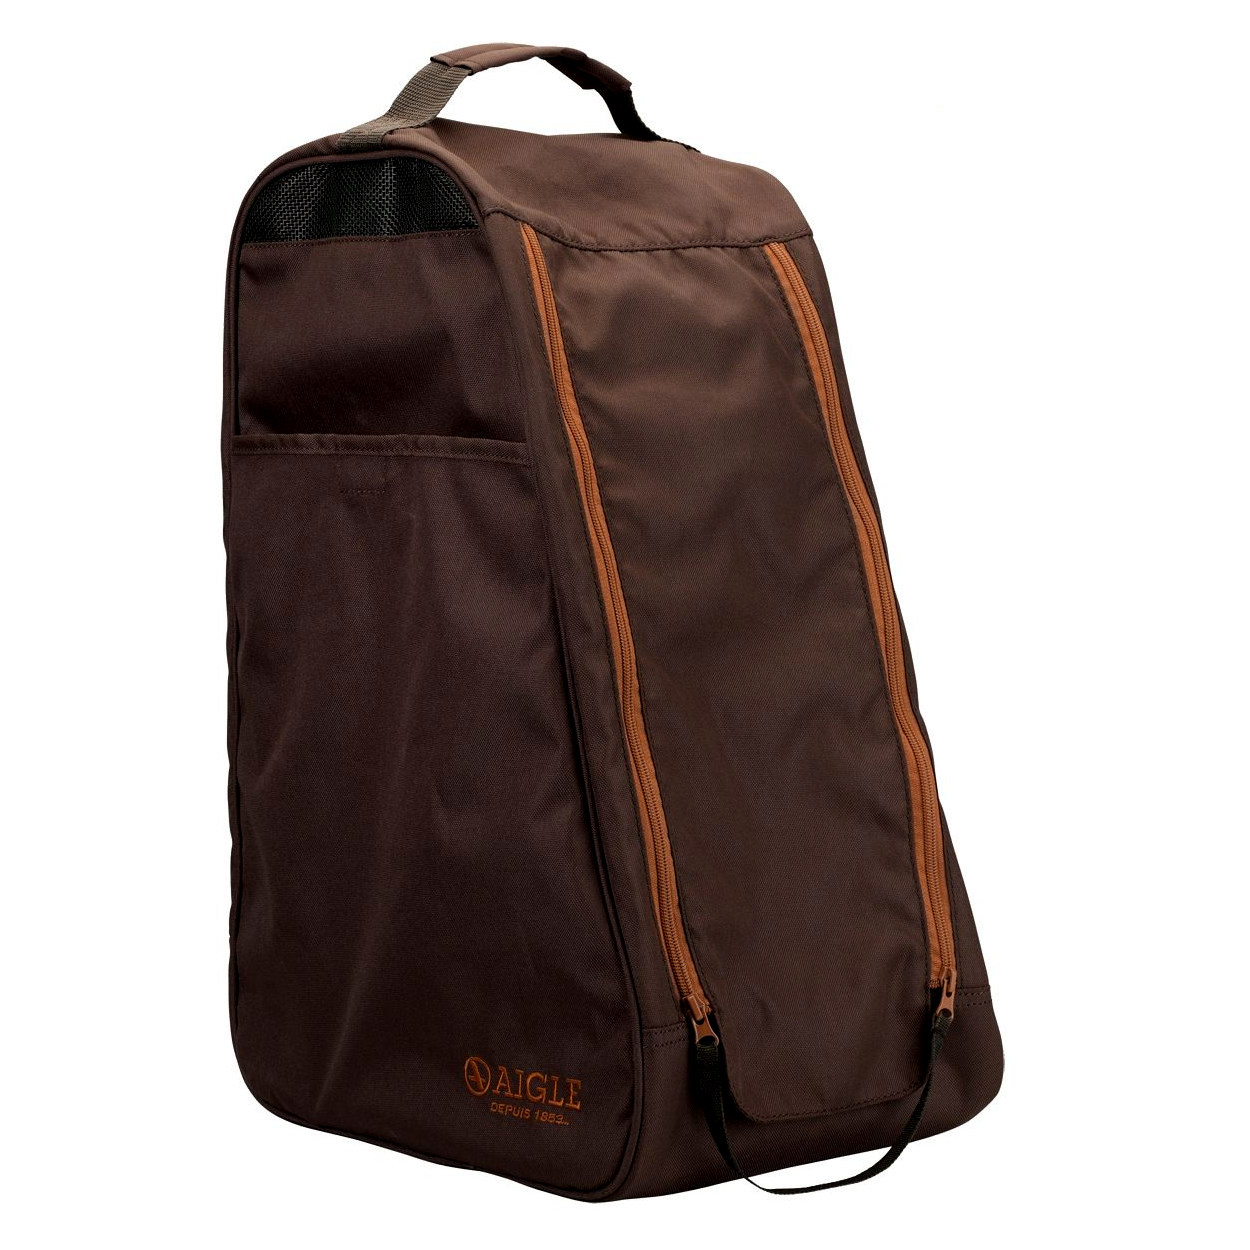 rydale boot bag